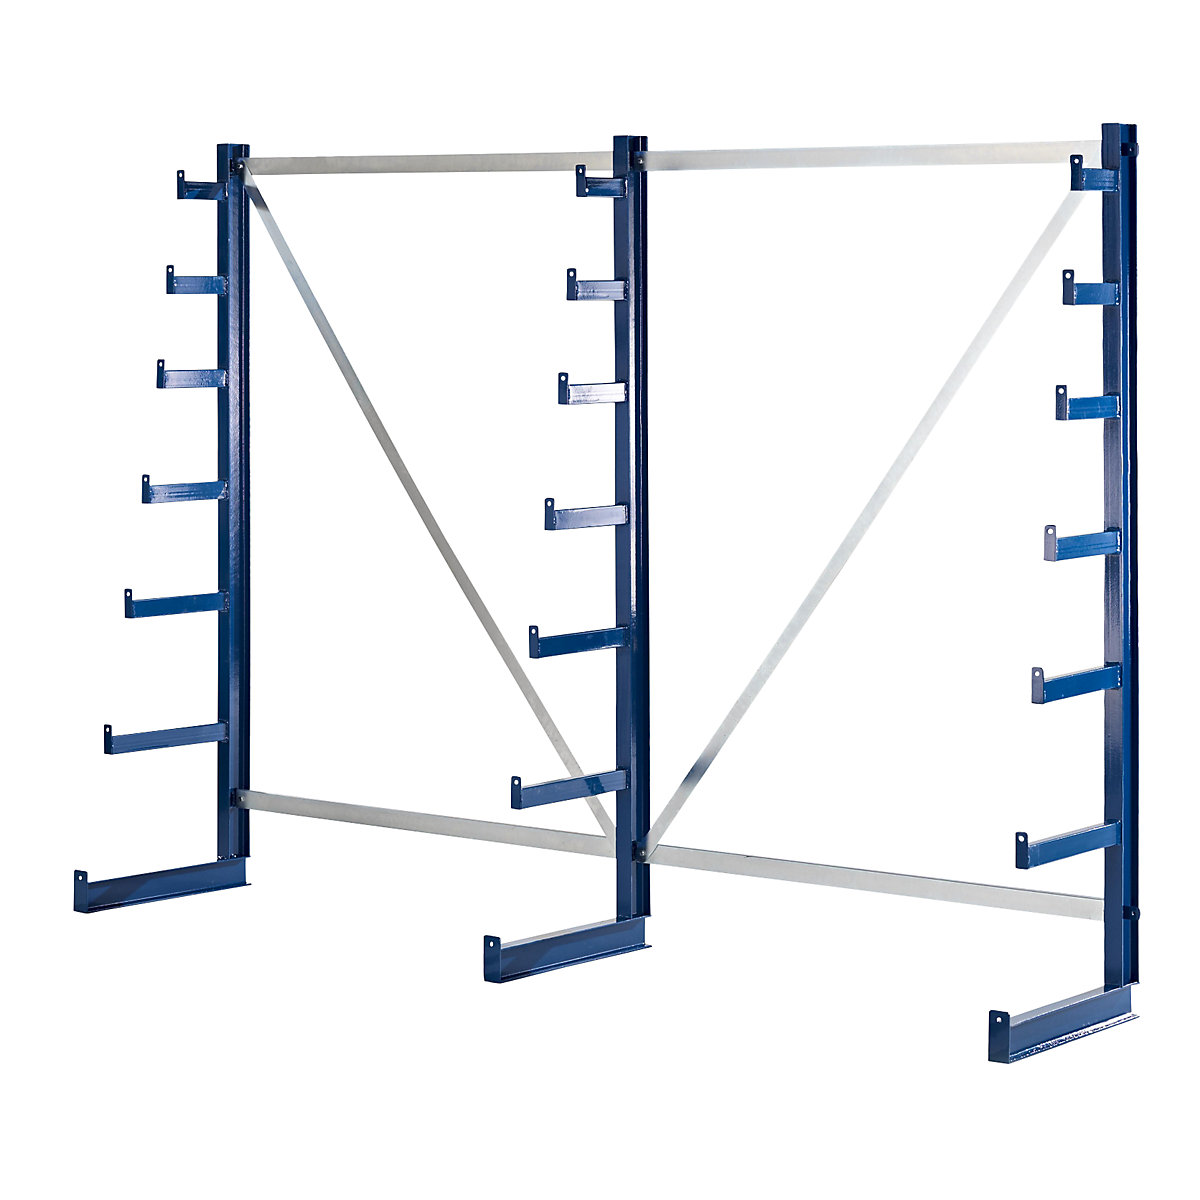 Cantilever racking unit with cantilever arms which taper towards the top – eurokraft pro